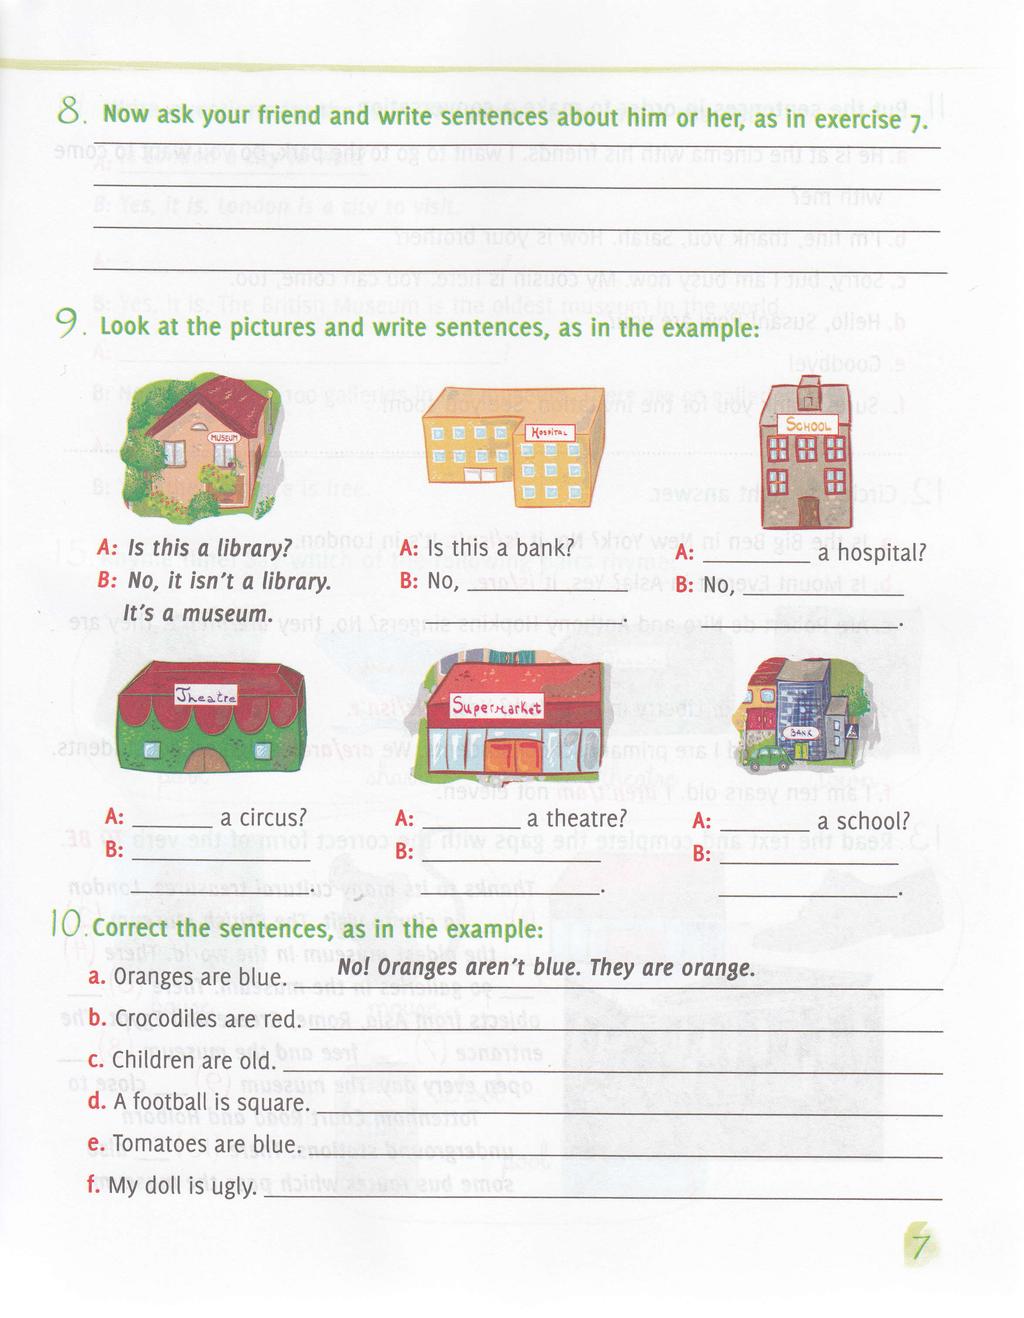 E Now ask your friend and write sentences about him or her, as in exercise 7. I Look at the pictures and write sentences, as in the example: ls this a library? No, it, isn't a library. It's a museum.